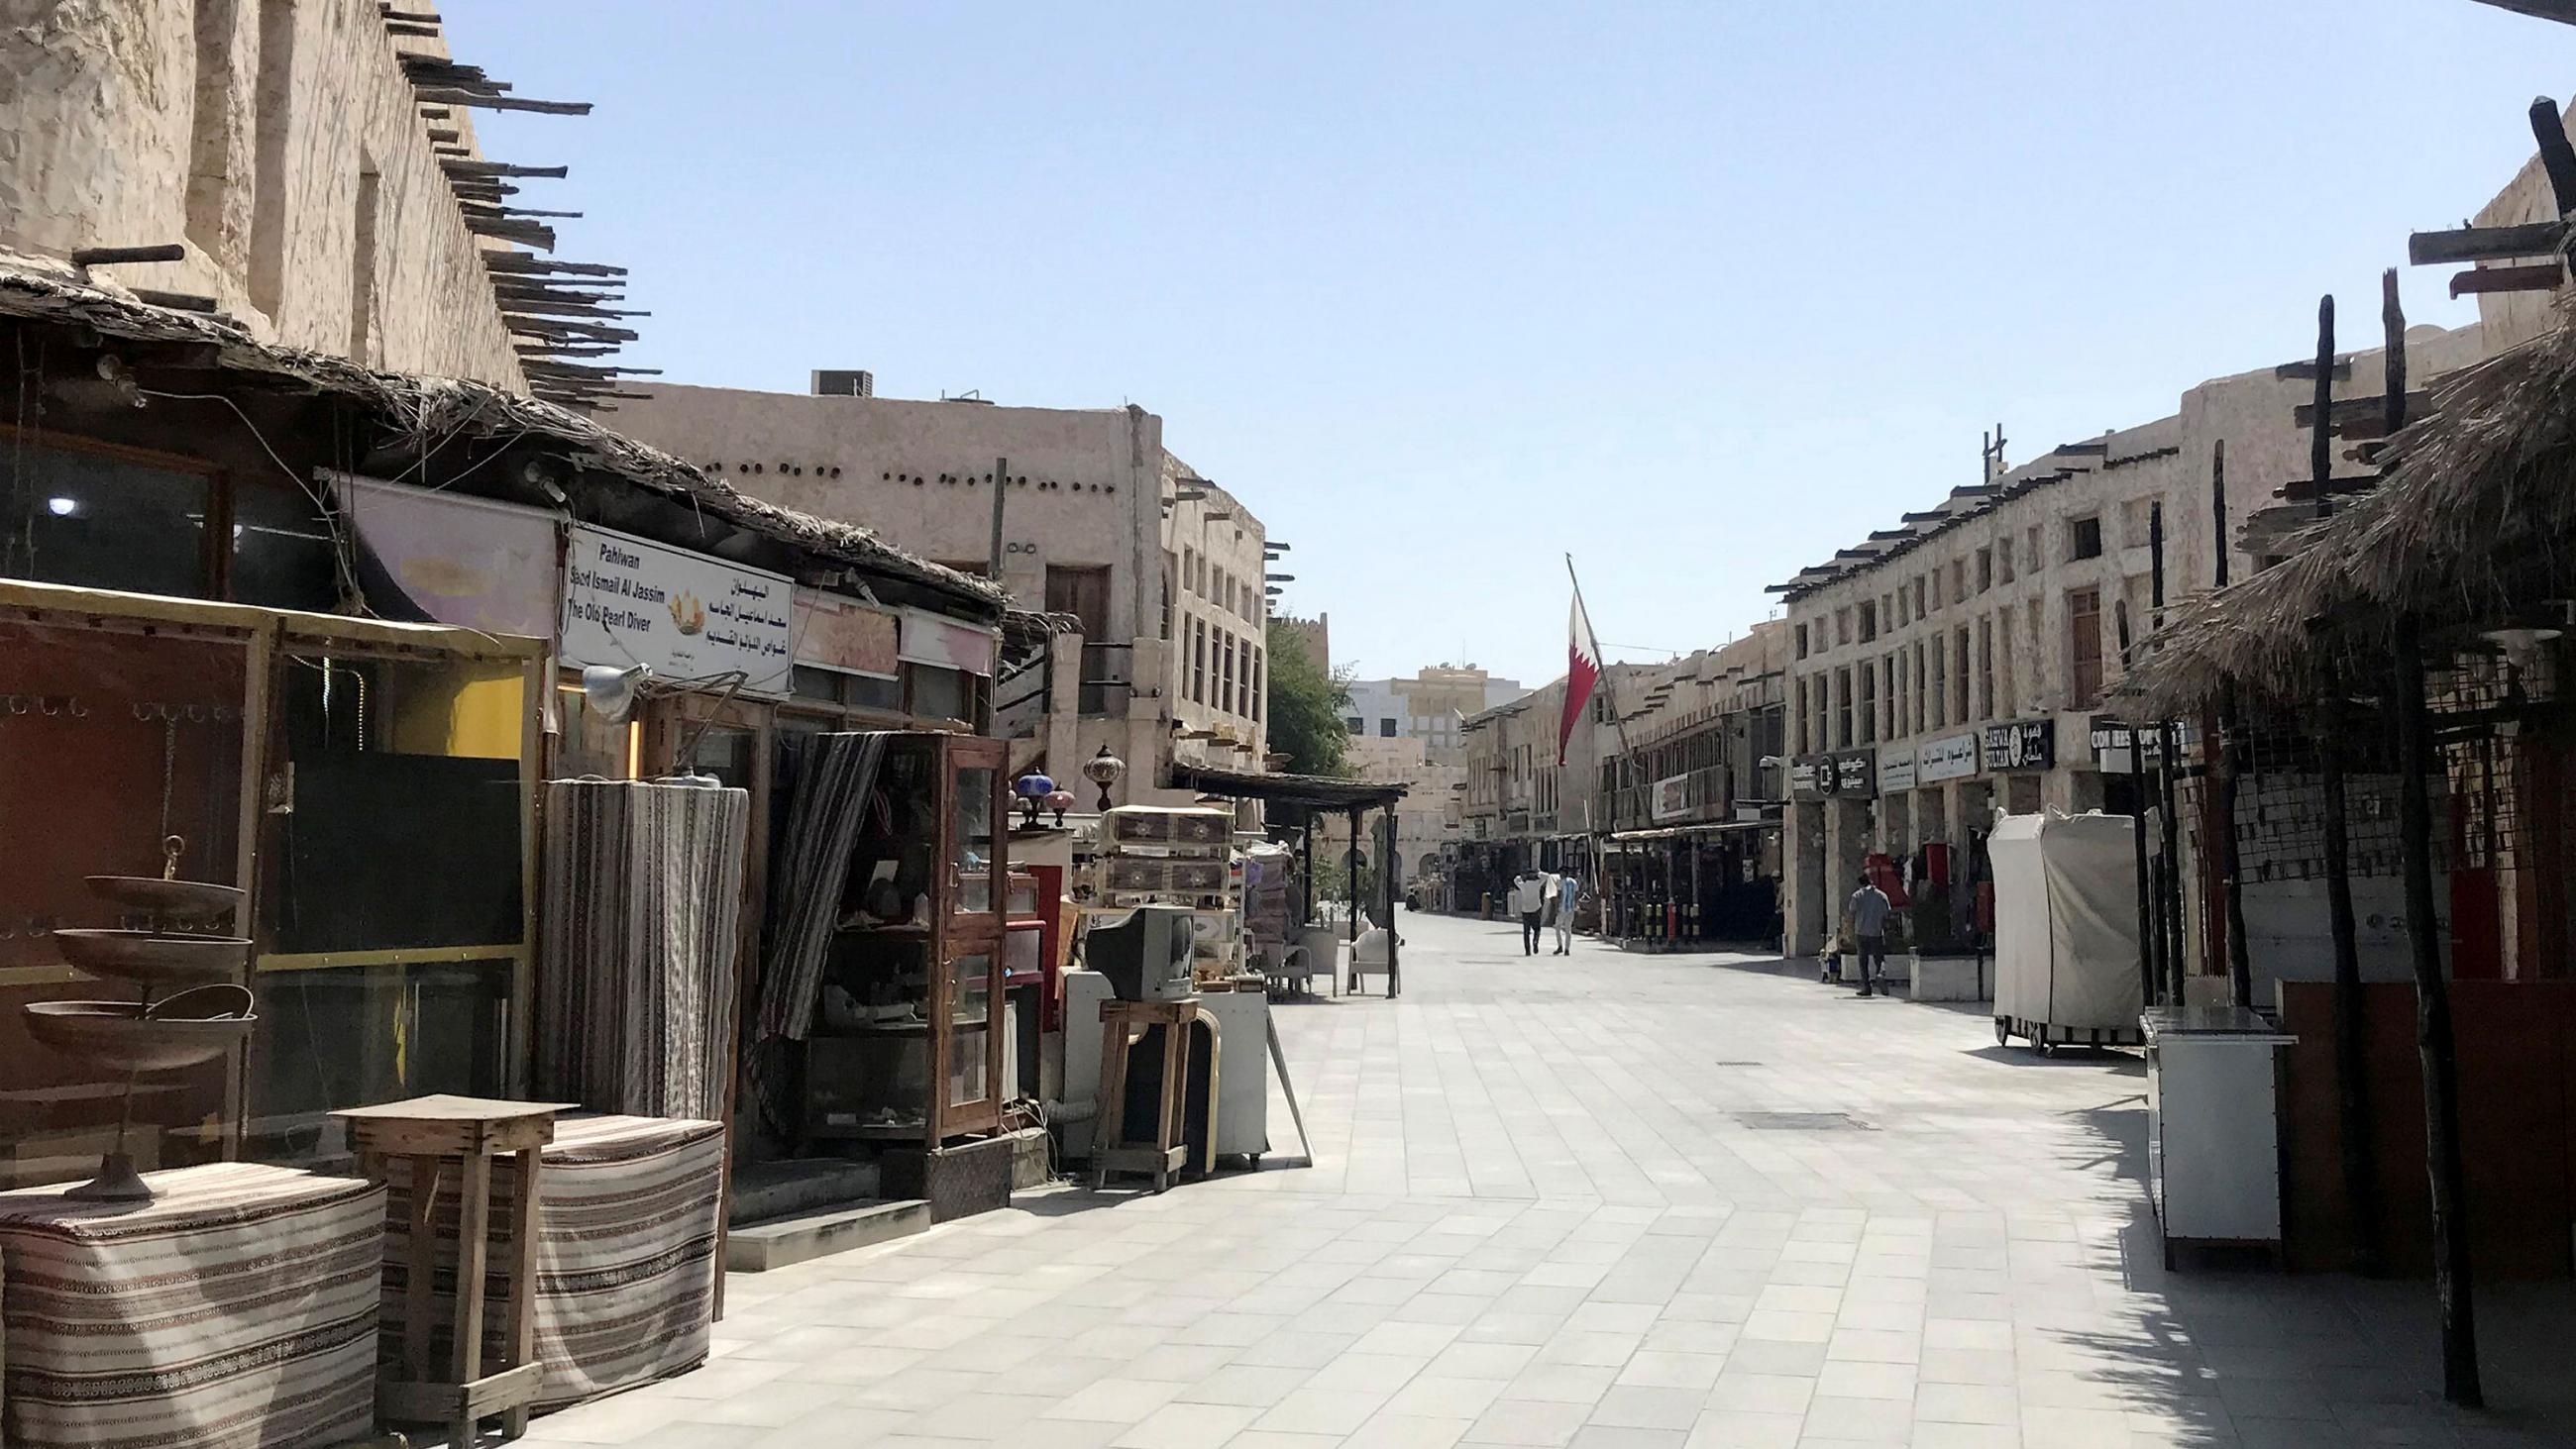 The image shows the empty, mostly abandoned stalls of a Middle Eastern marketplace 